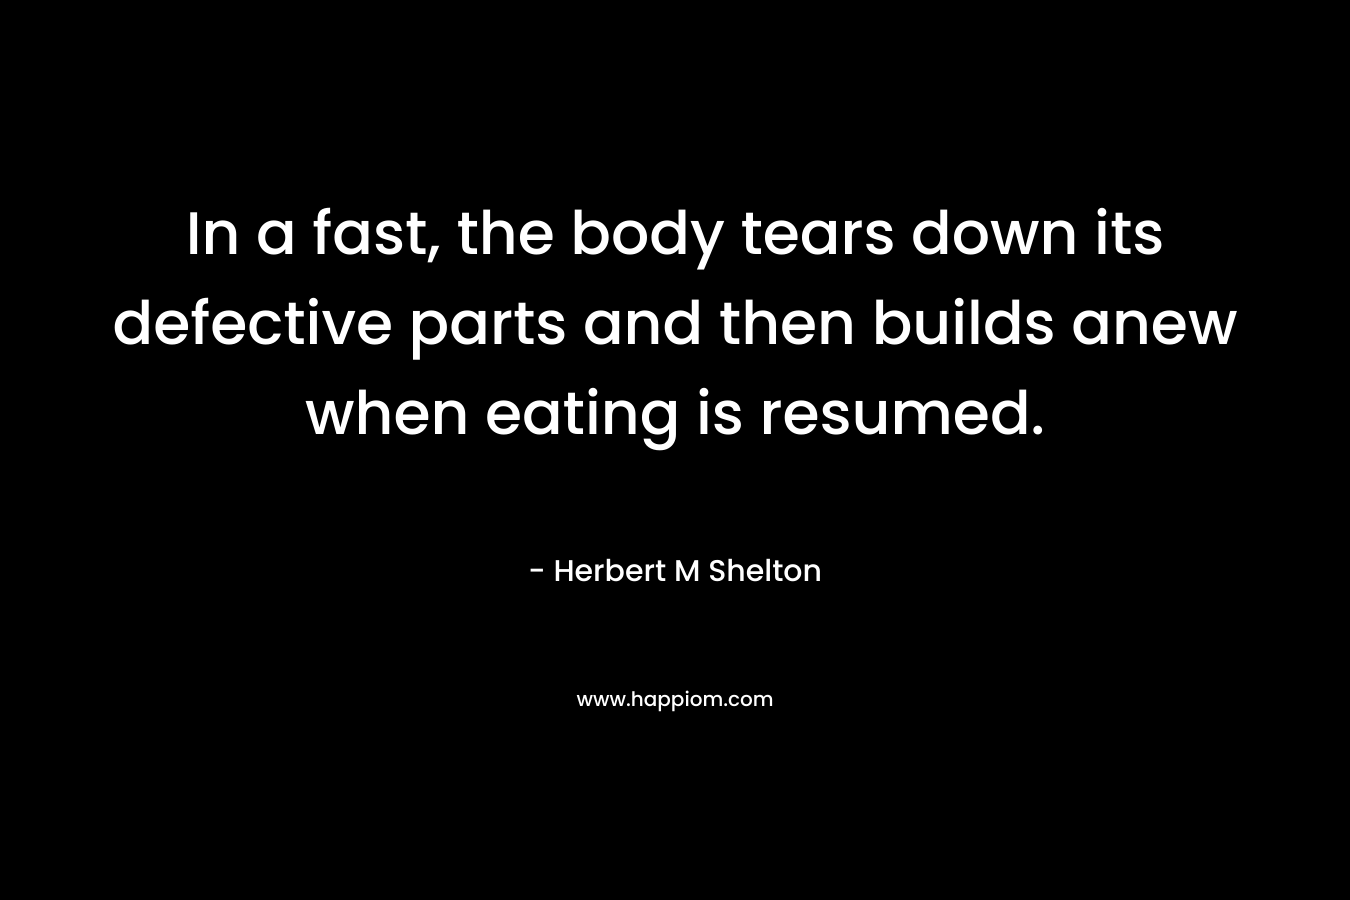 In a fast, the body tears down its defective parts and then builds anew when eating is resumed. – Herbert M Shelton